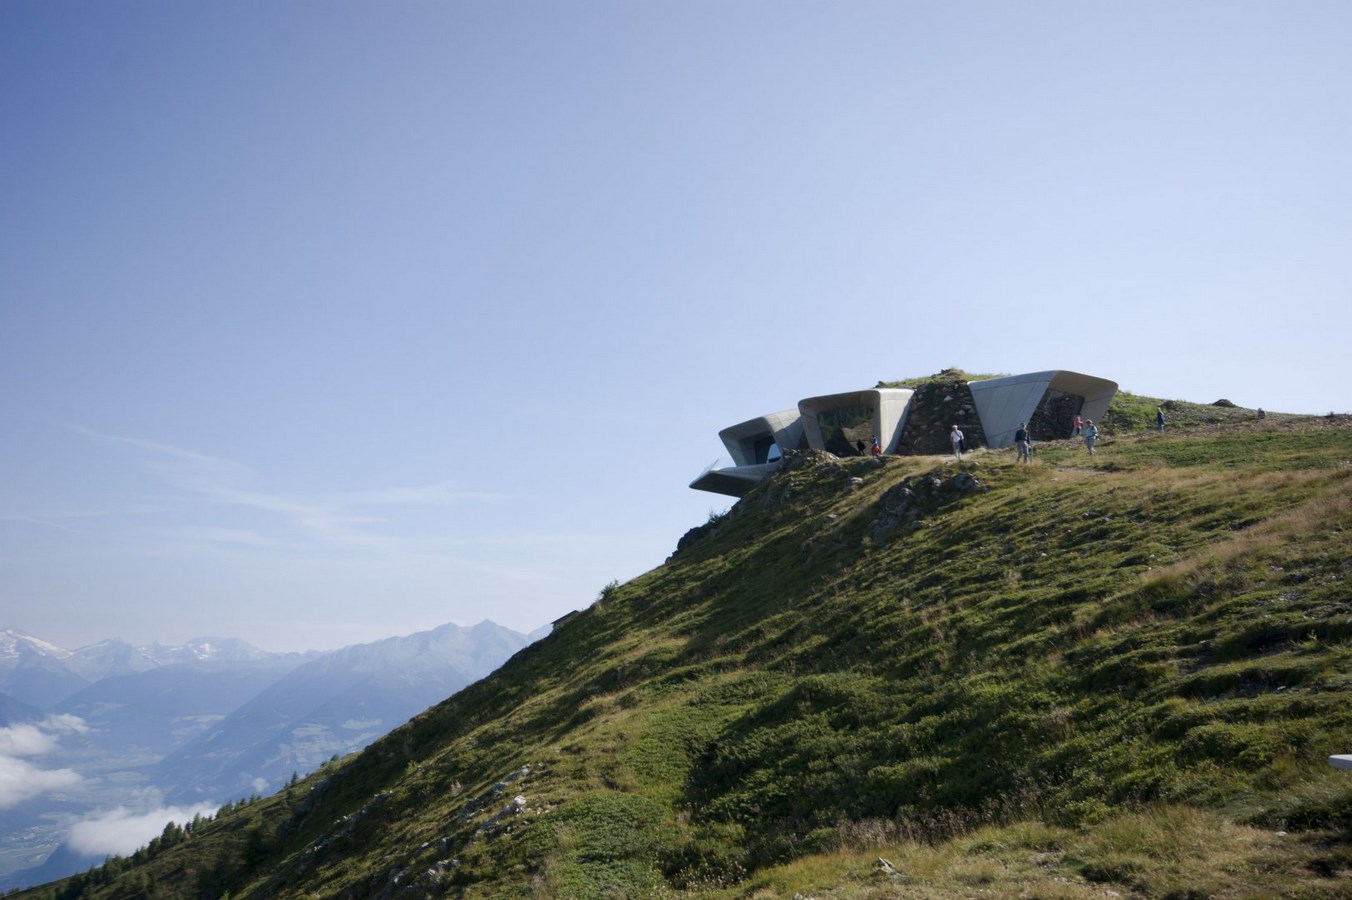 30 Projects That Define Zaha Hadid’s Style - Messner Mountain Museum Corones, Italy